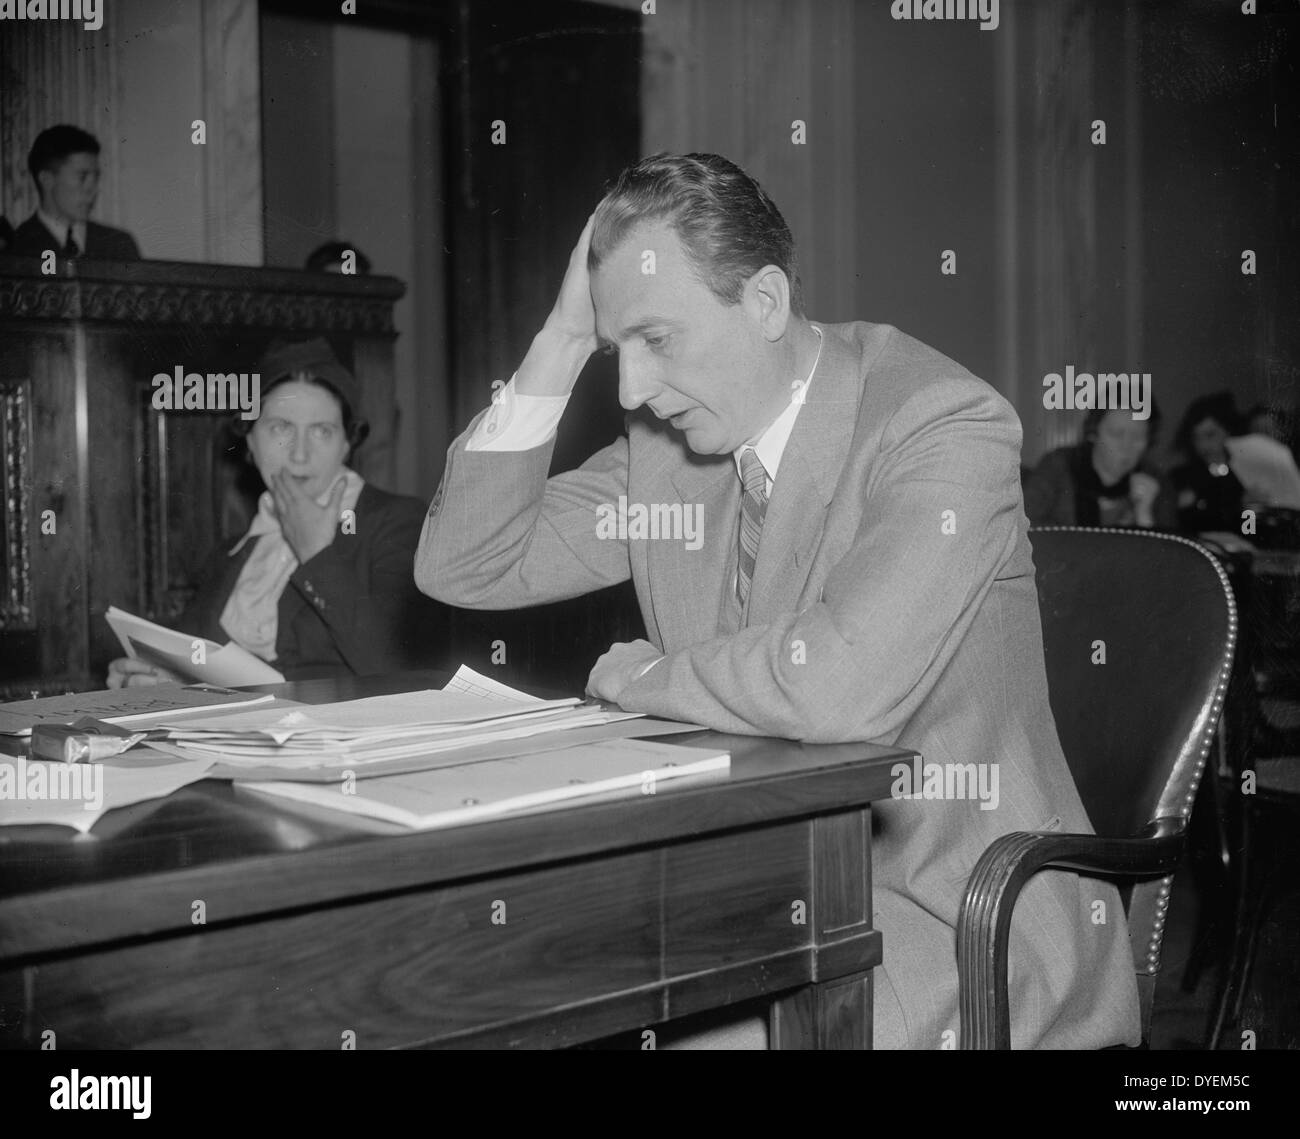 Washington, D.C., Mar. 17. Corrington Gill, Asst. WPA Administrator told the Senate Committee on relief today that 3,500,000 families are facing serious deprivation. 1938. Stock Photo